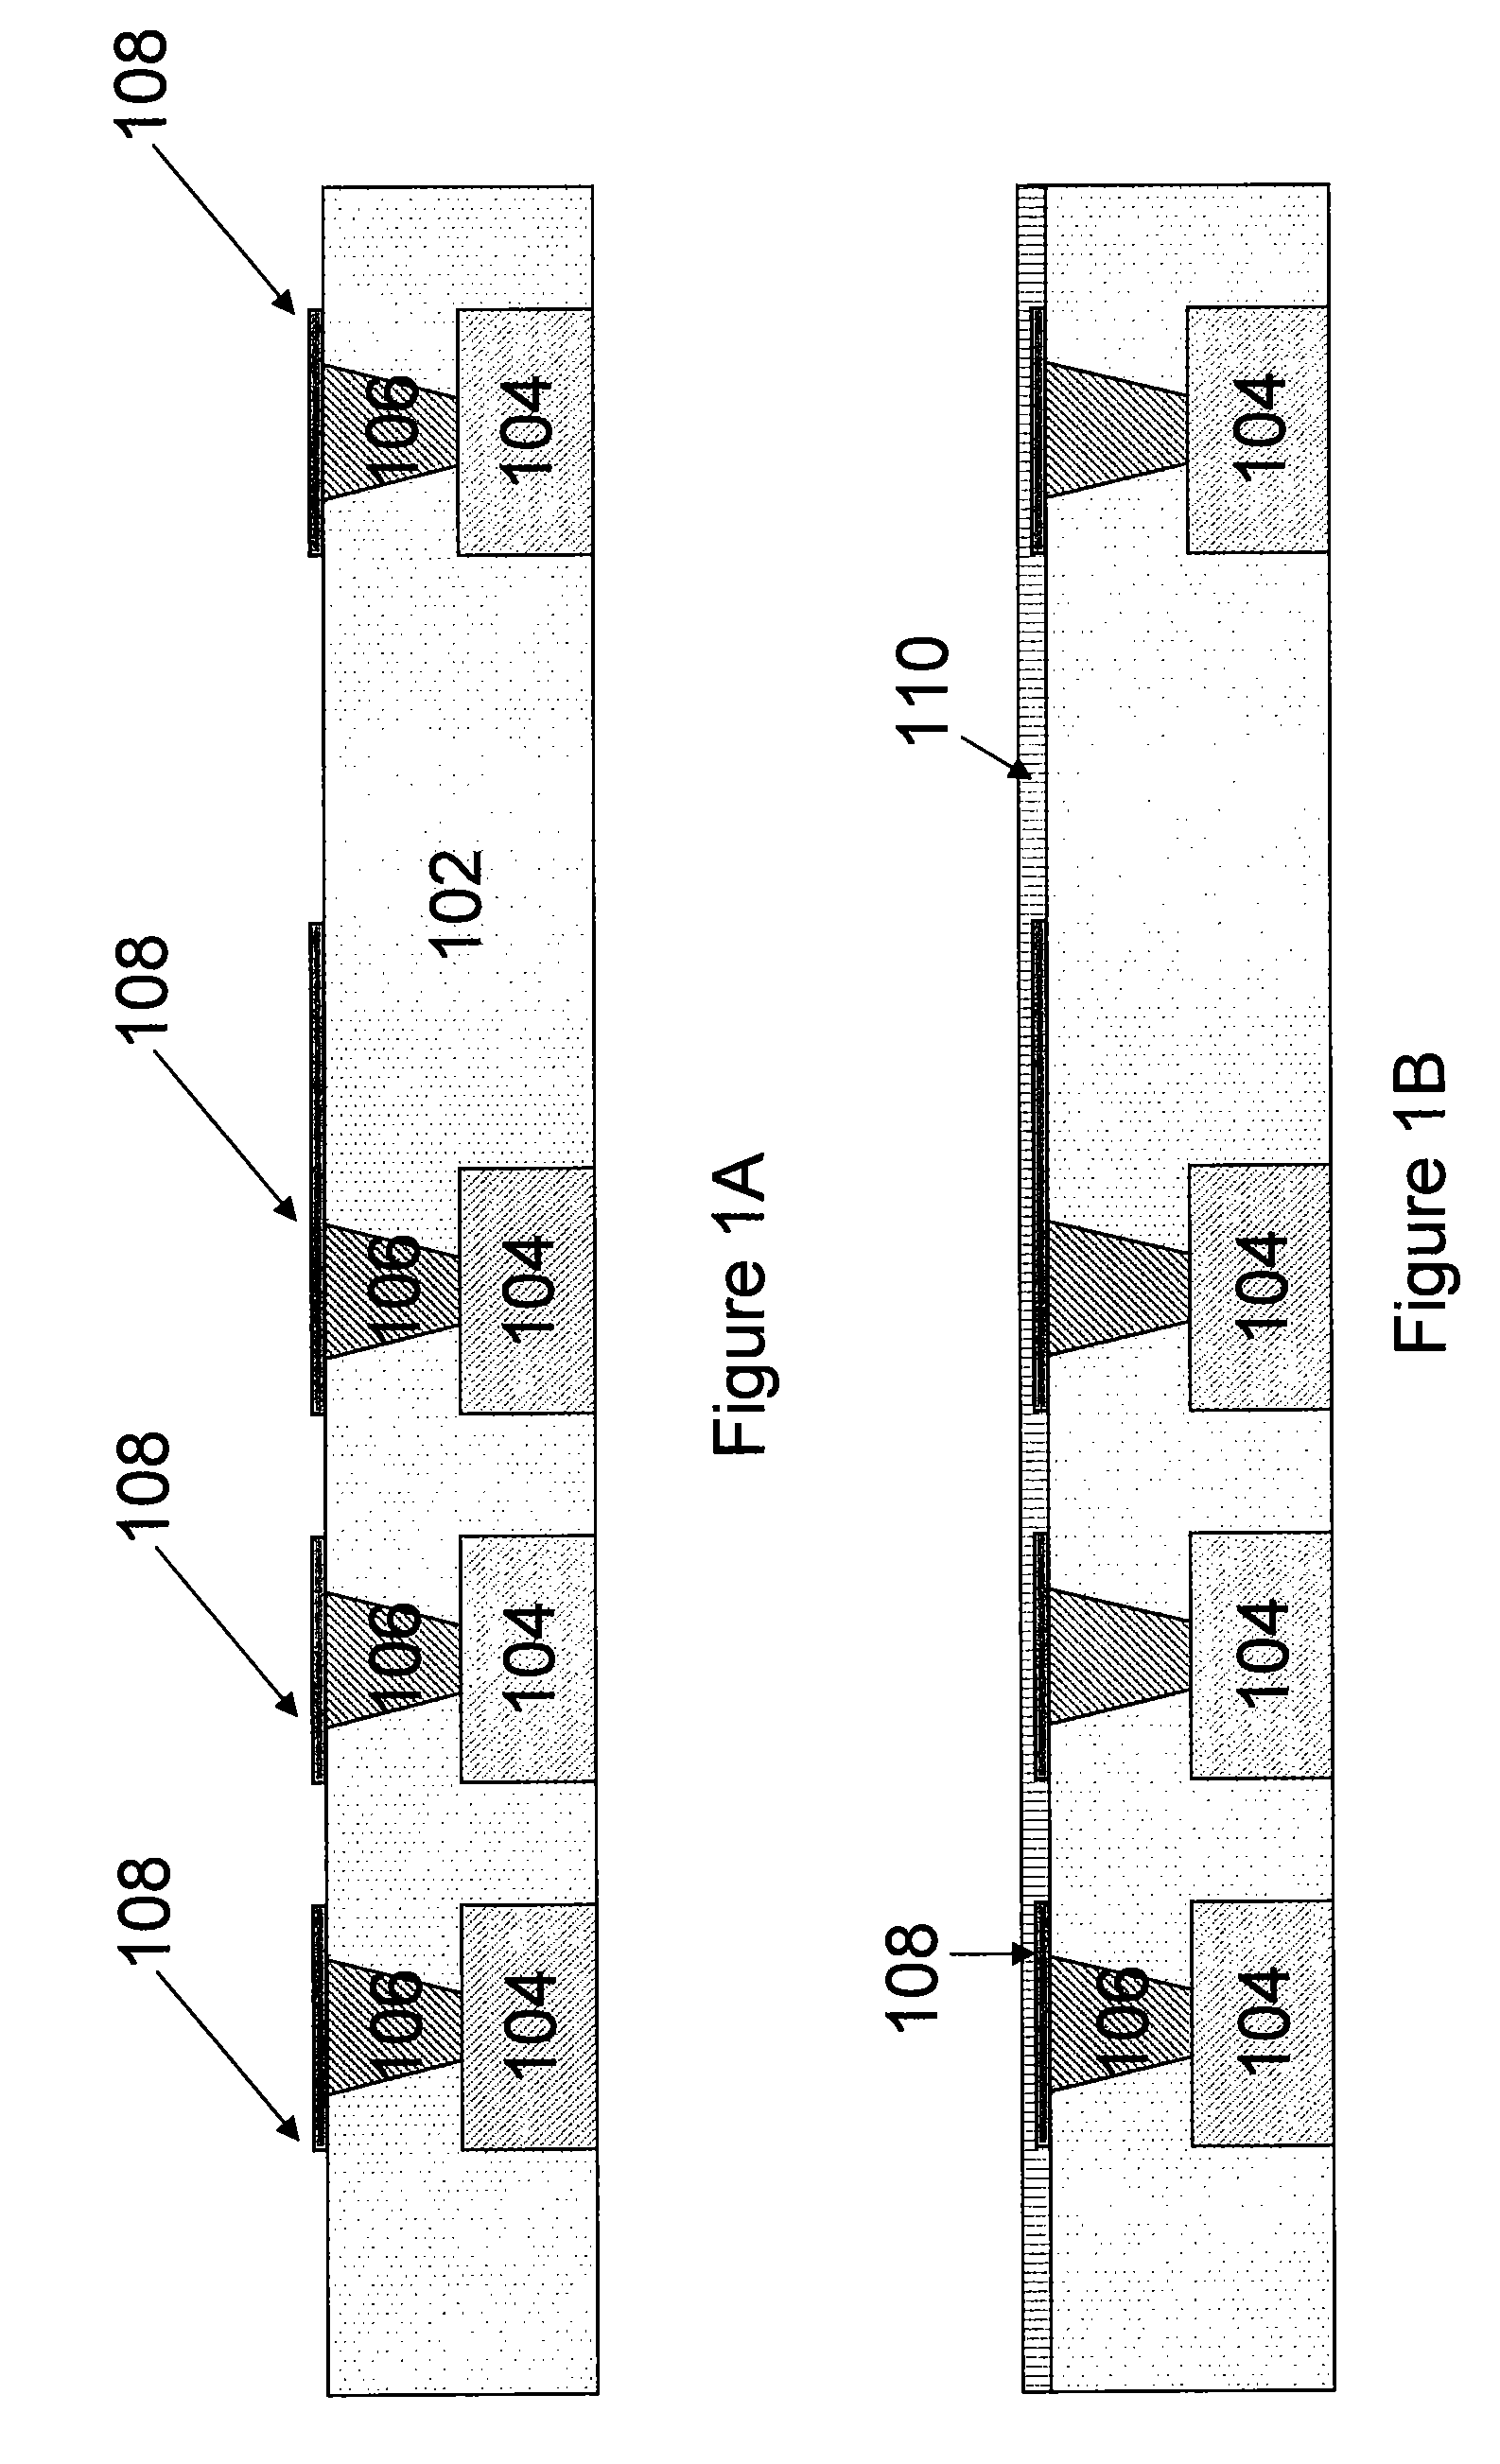 System and Method of Encapsulation